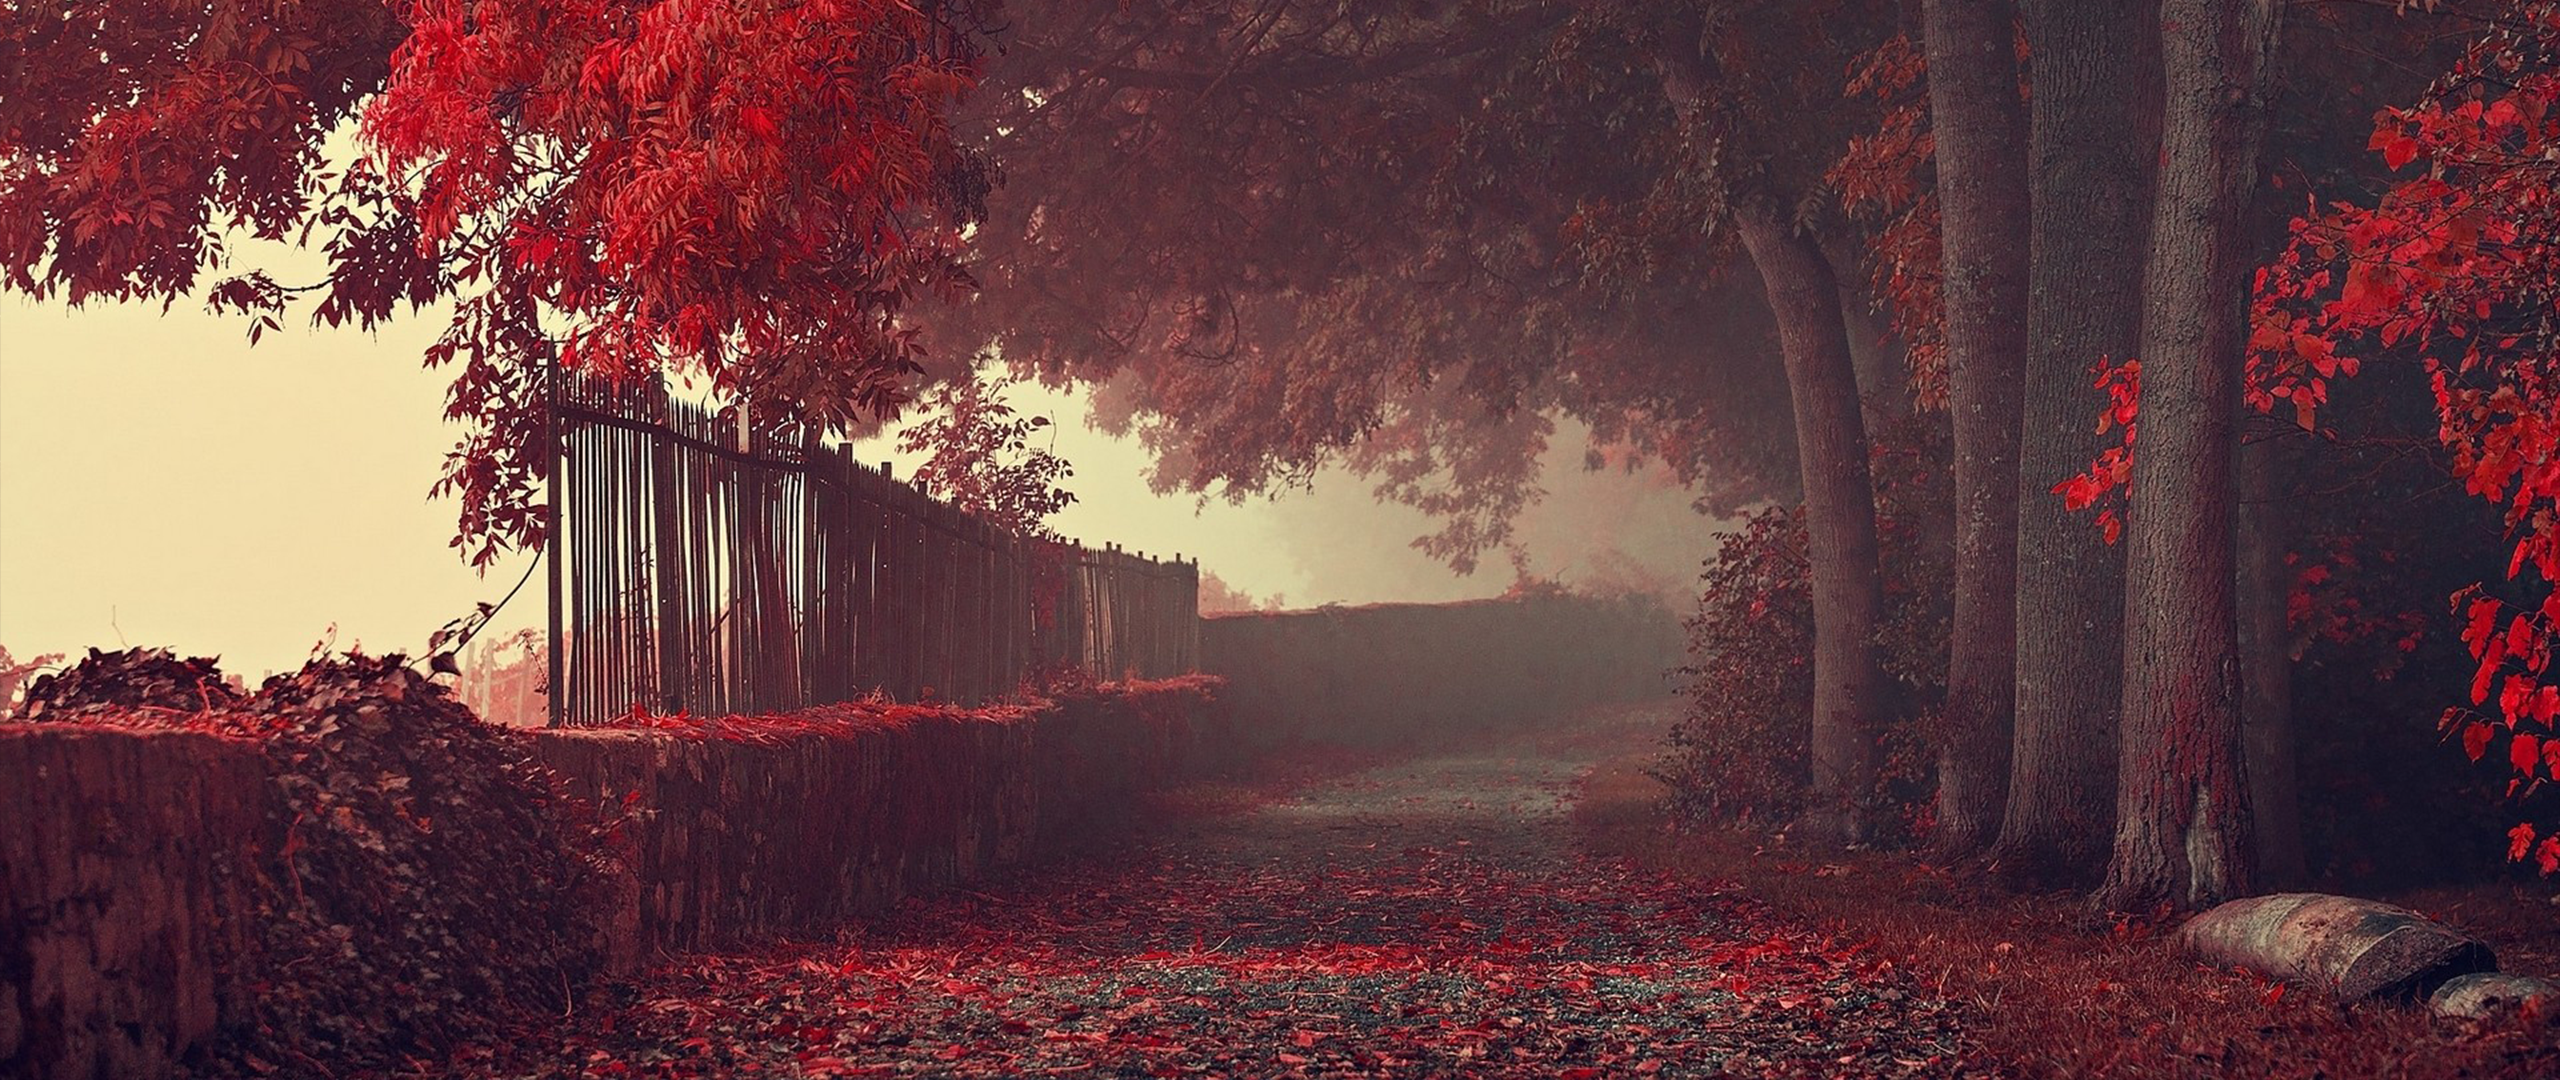 #path, #photography, #nature, #fall, #red, #trees, #ultra Wide, # Leaves, #park, Wallpaper. Mocah.org HD Wallpaper